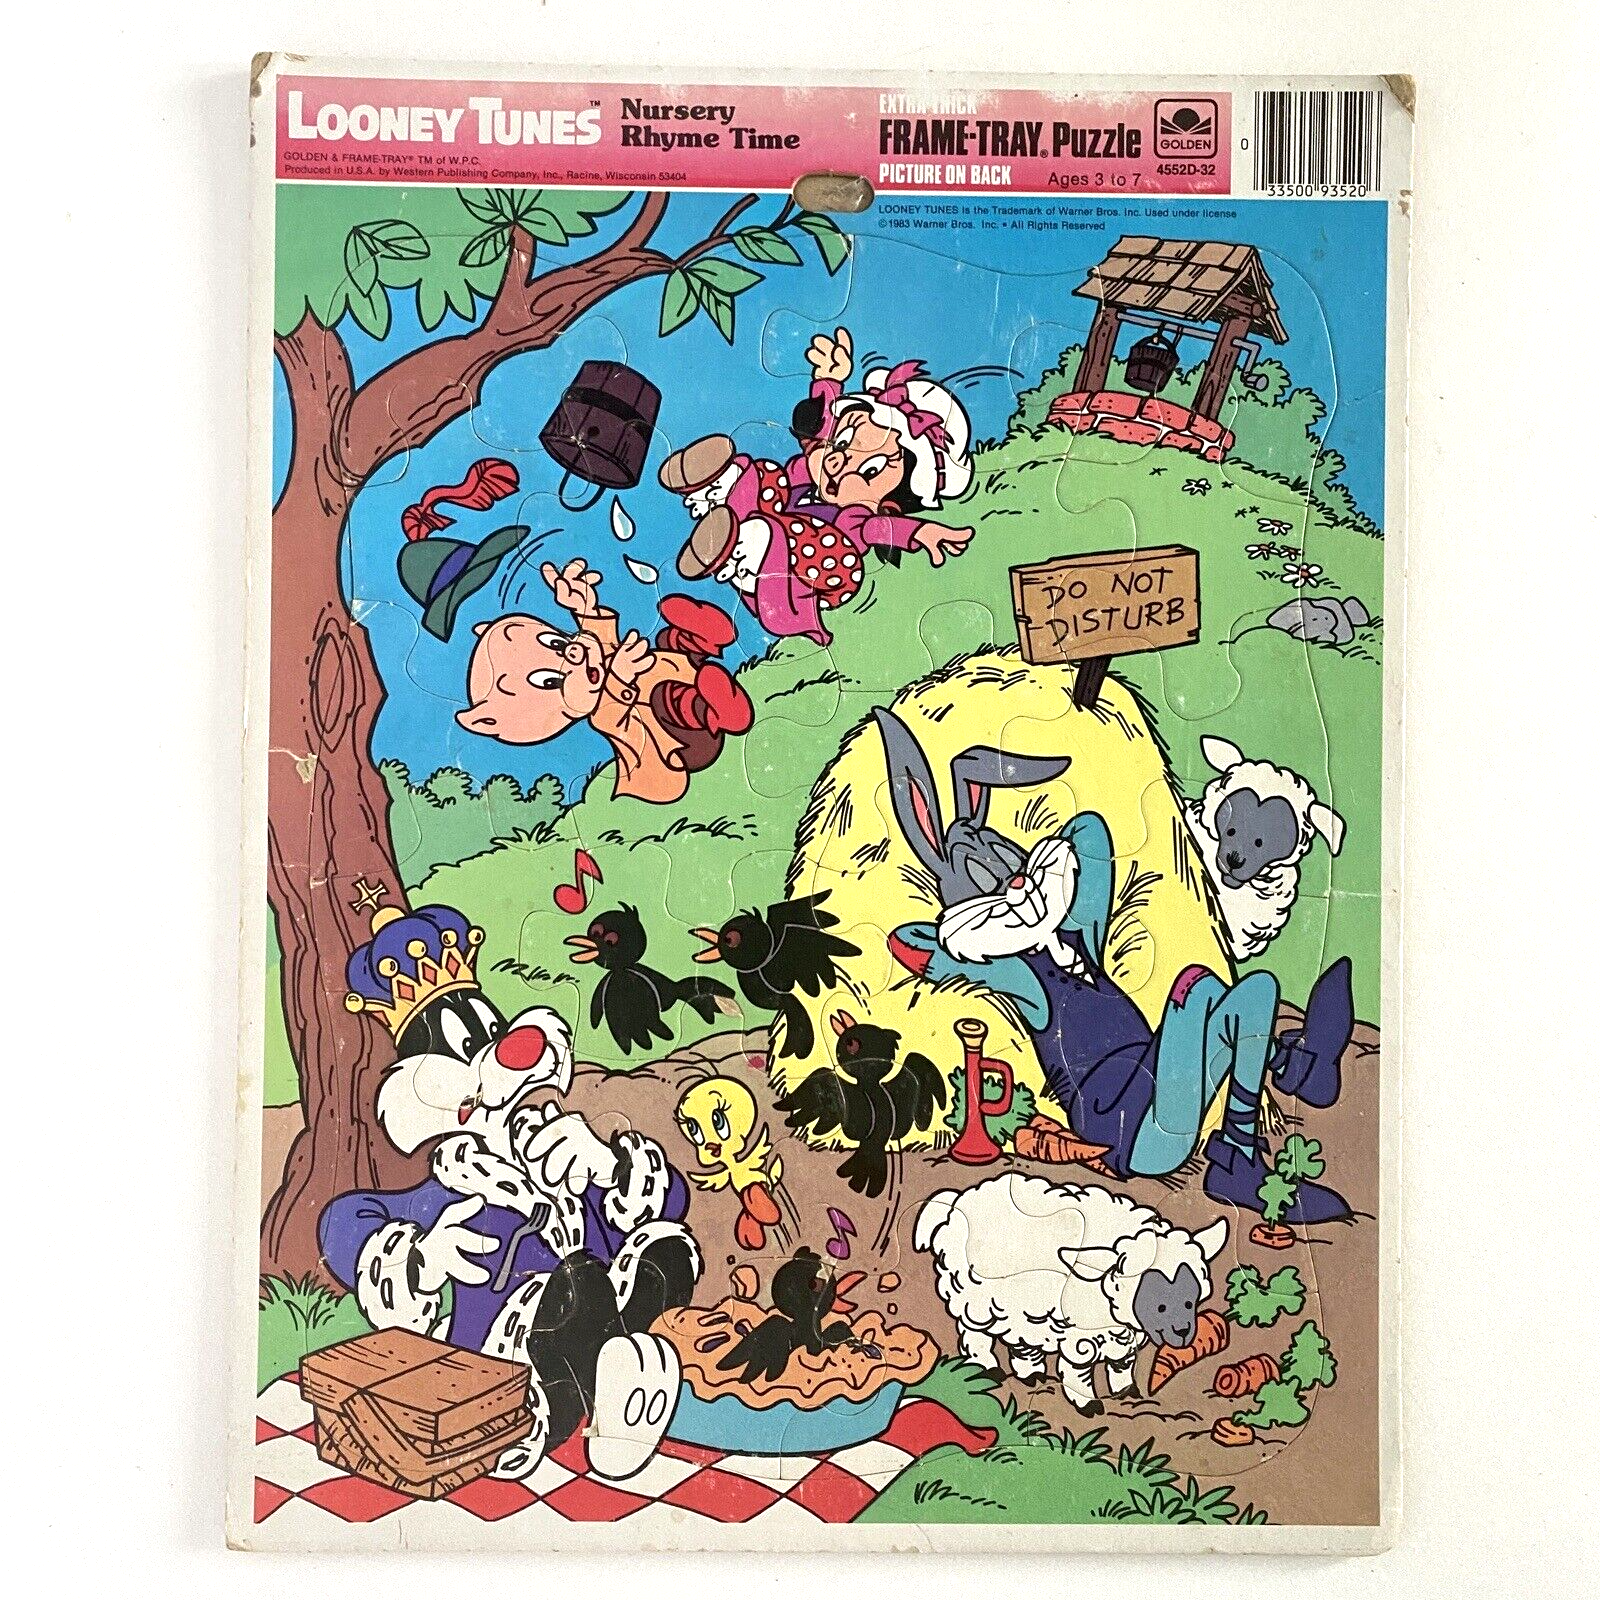 1983 Golden Looney Tunes Nursery Rhyme Time Frame Tray Puzzle 4552D-32 Vintage - $19.95